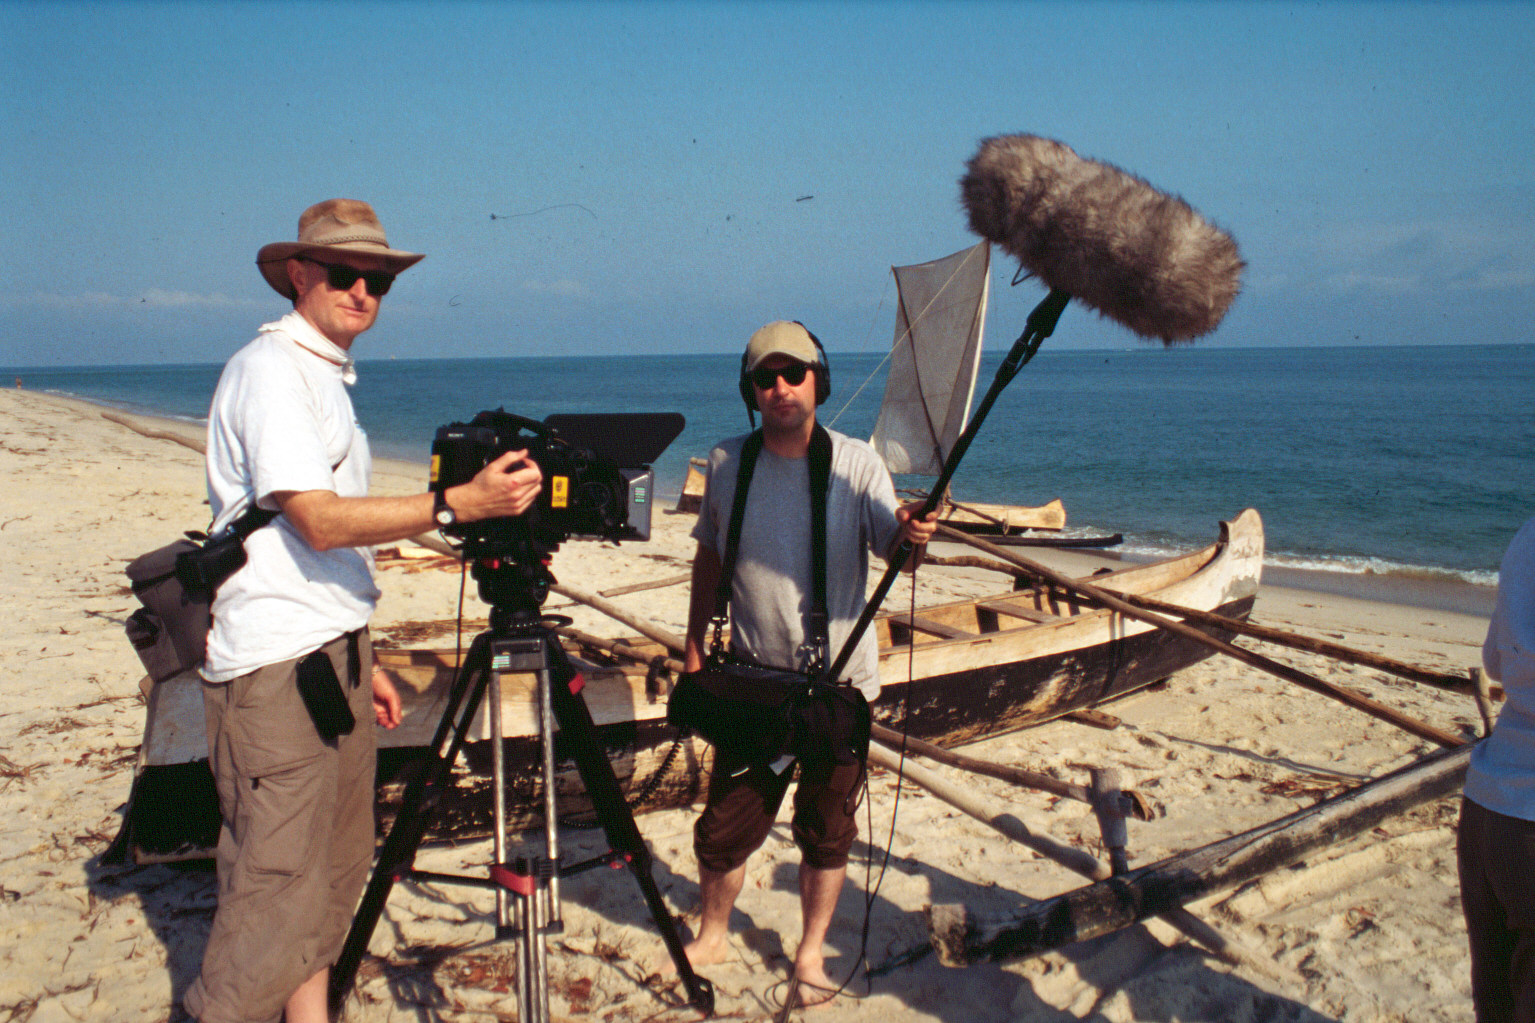 Madagascar, Oct 2001 for 'What Killed The Mega Beasts' with Sound recordist William Knight